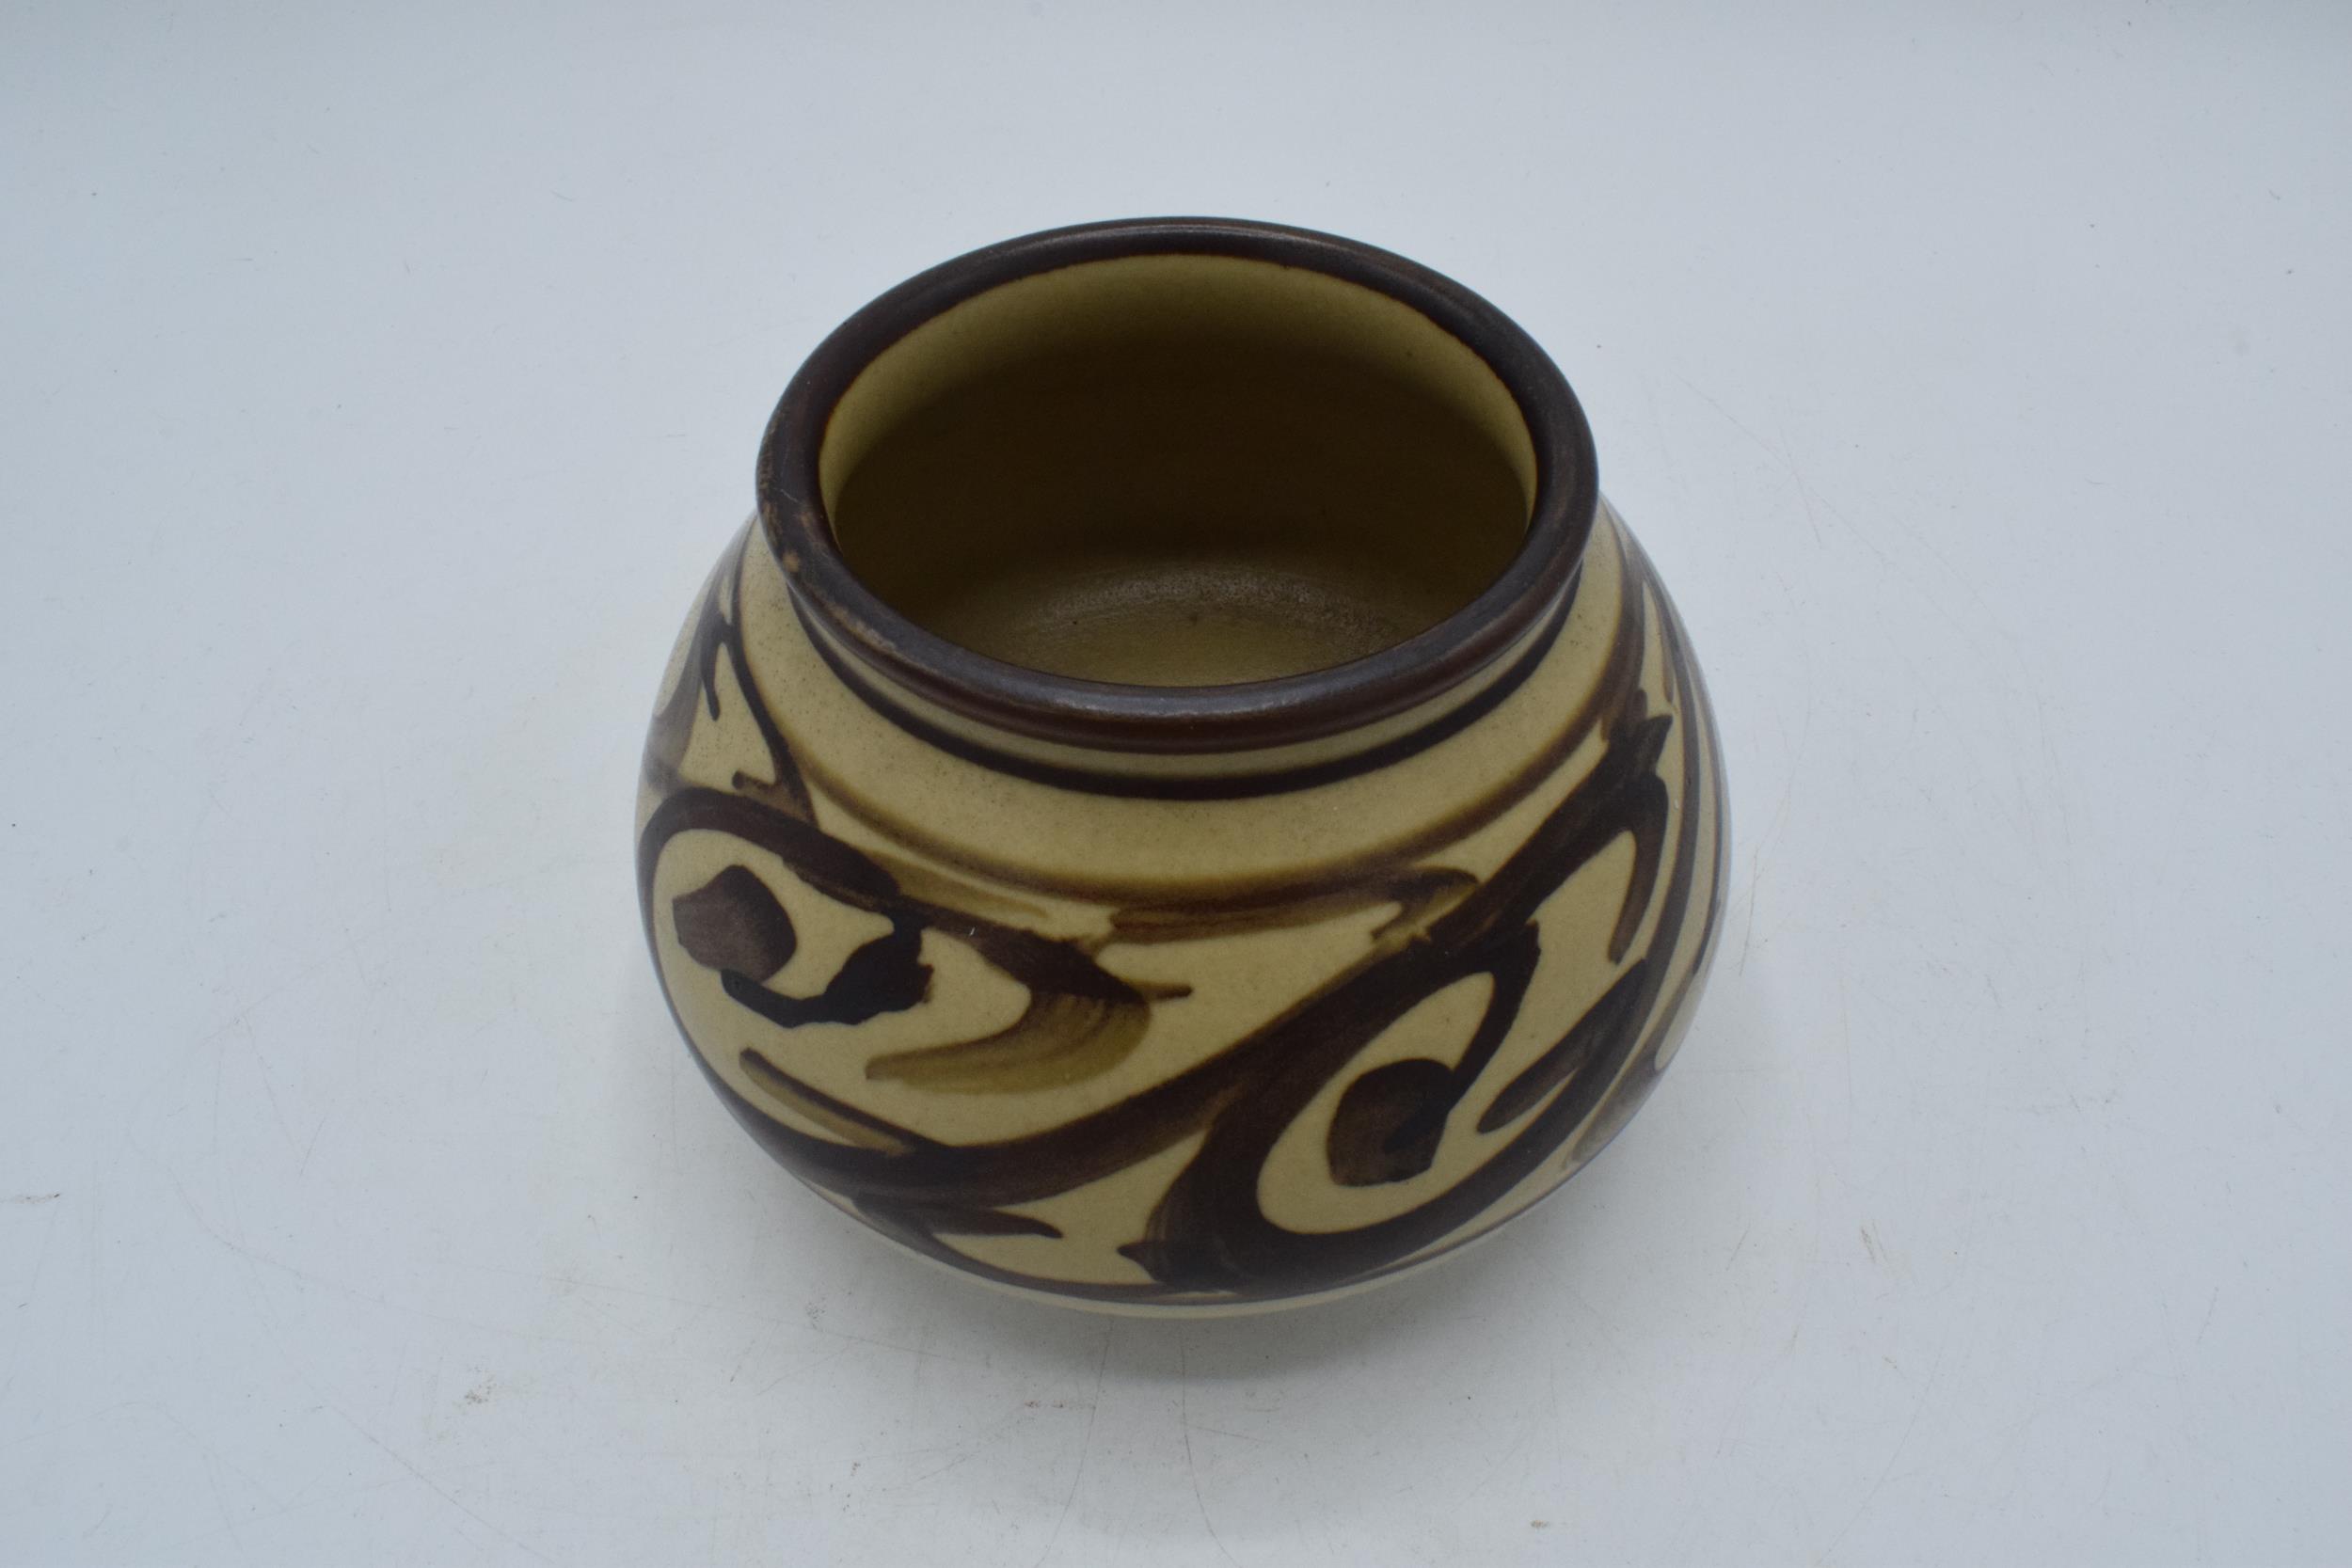 Mid-century Bullers Vase, Agnete Hoy studio potter with Butter's Ltd from 1932 - 1952. Height 9.5cm. - Image 2 of 3